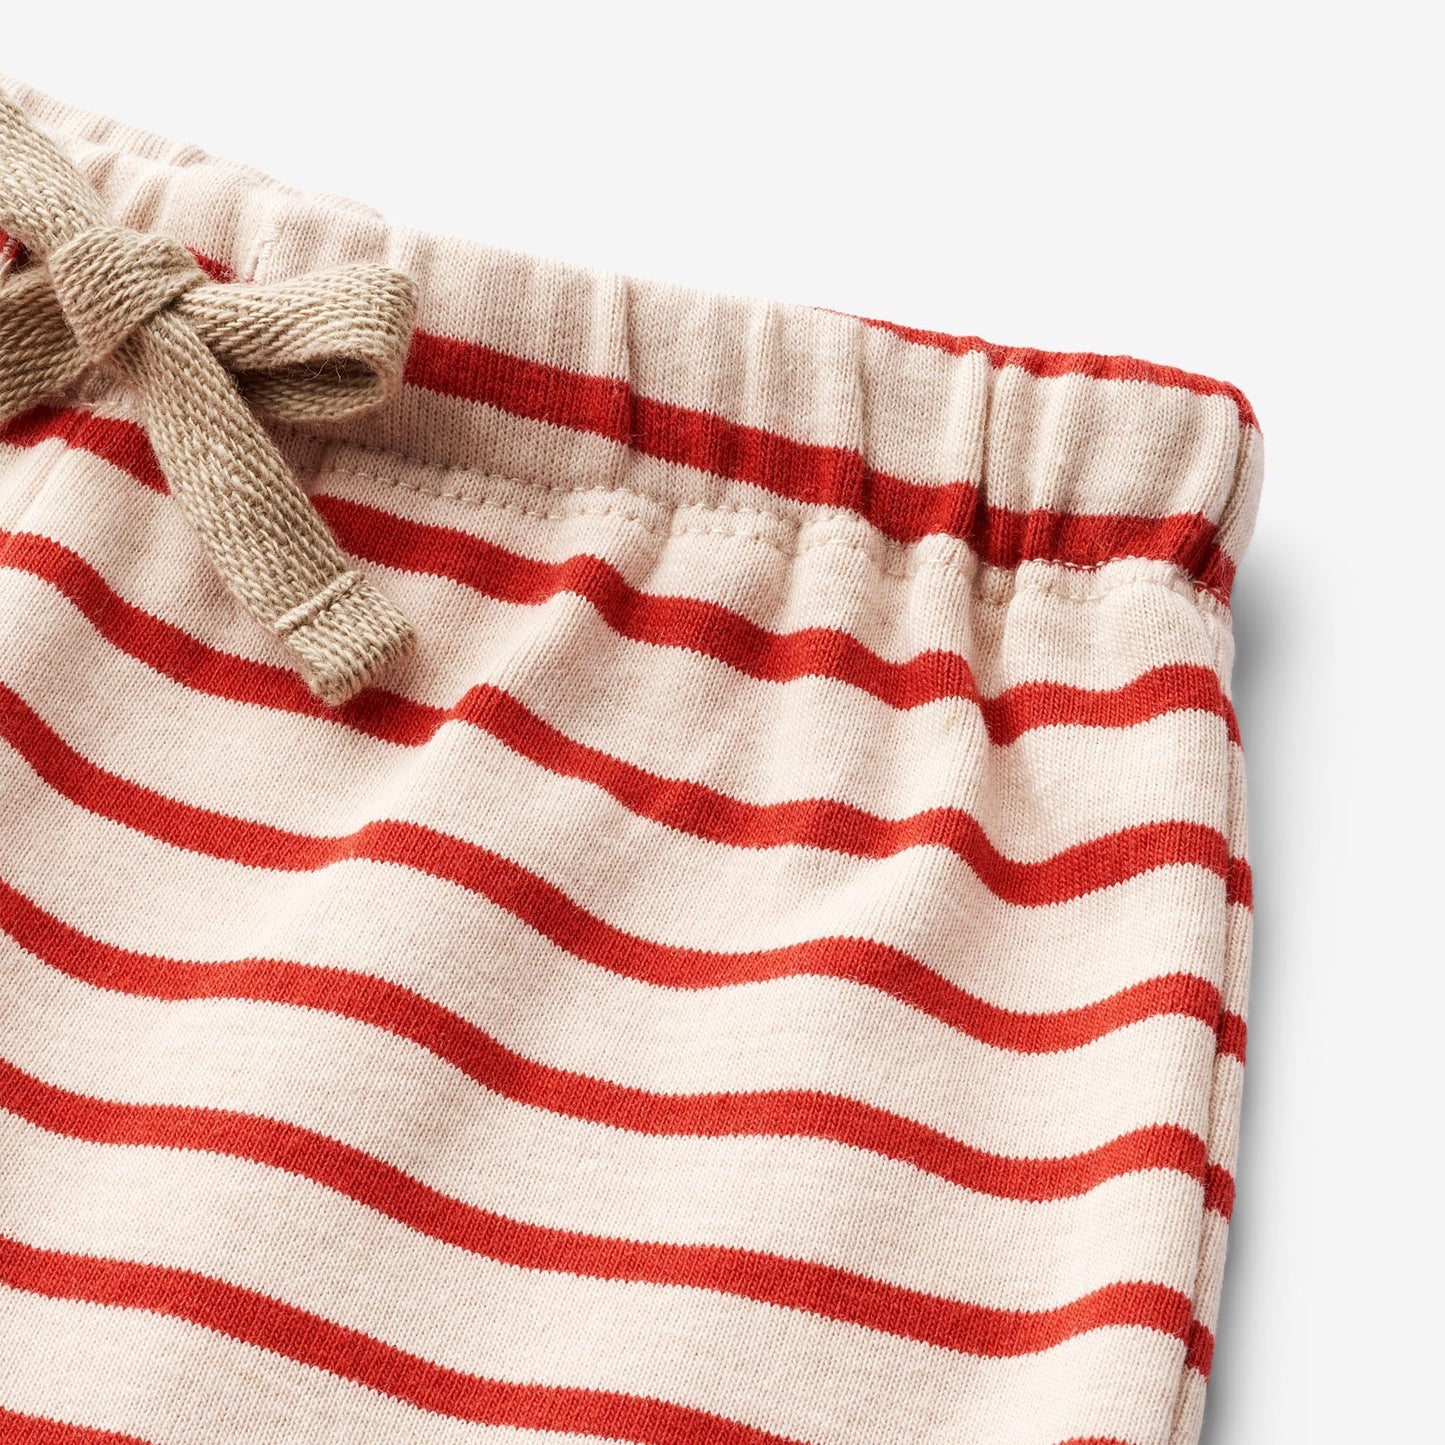 Wheat 'Vic' Jersey Baby Shorts - Red Stripe